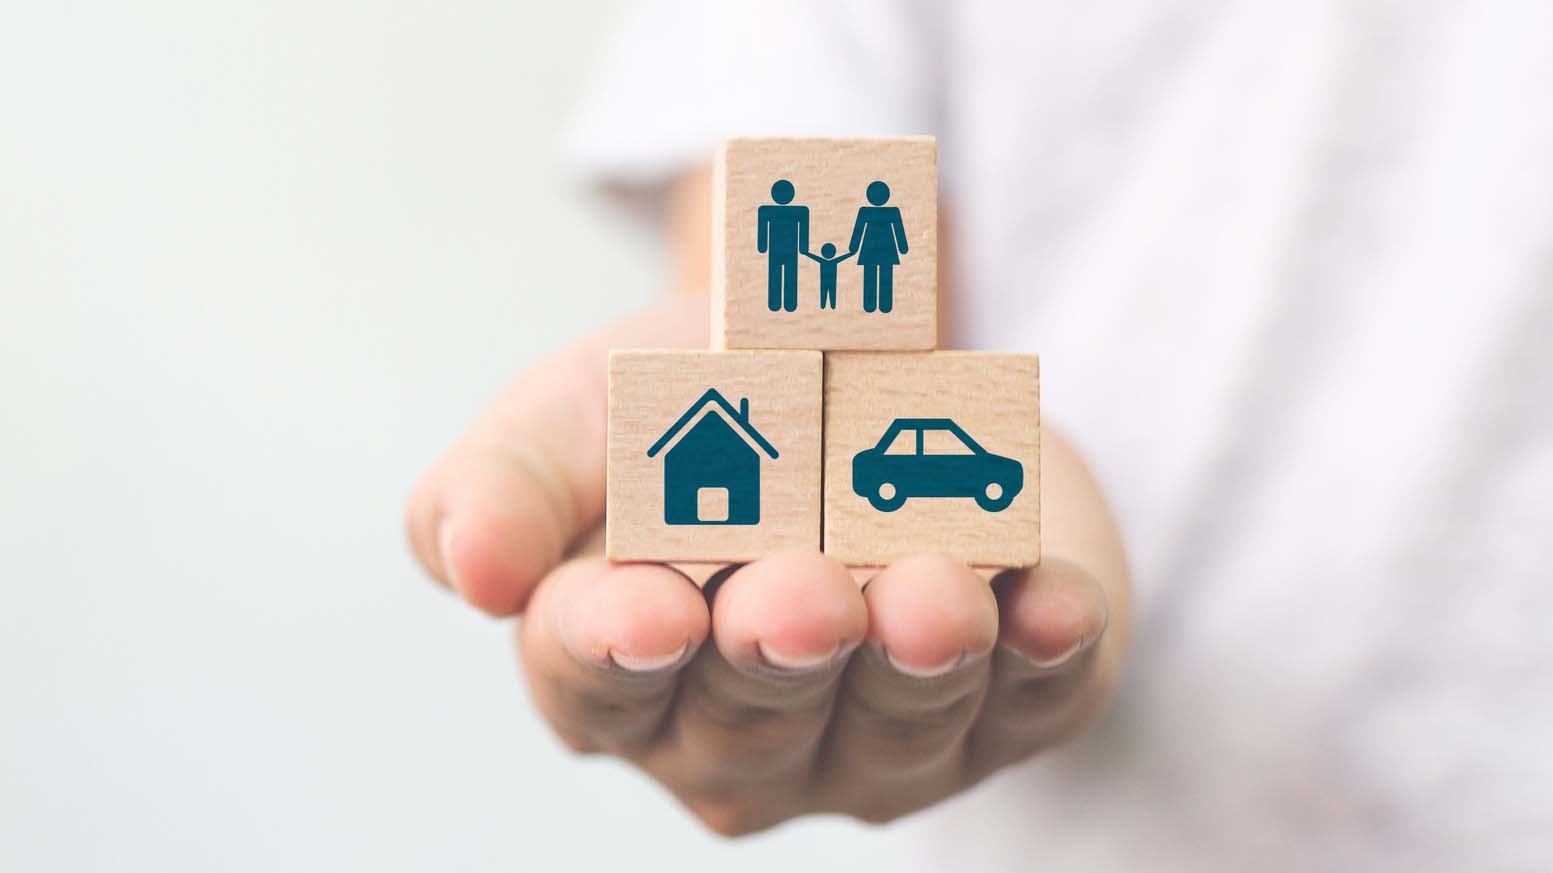 A hand holding out three blocks with symbols depicting a house, a car, and a family